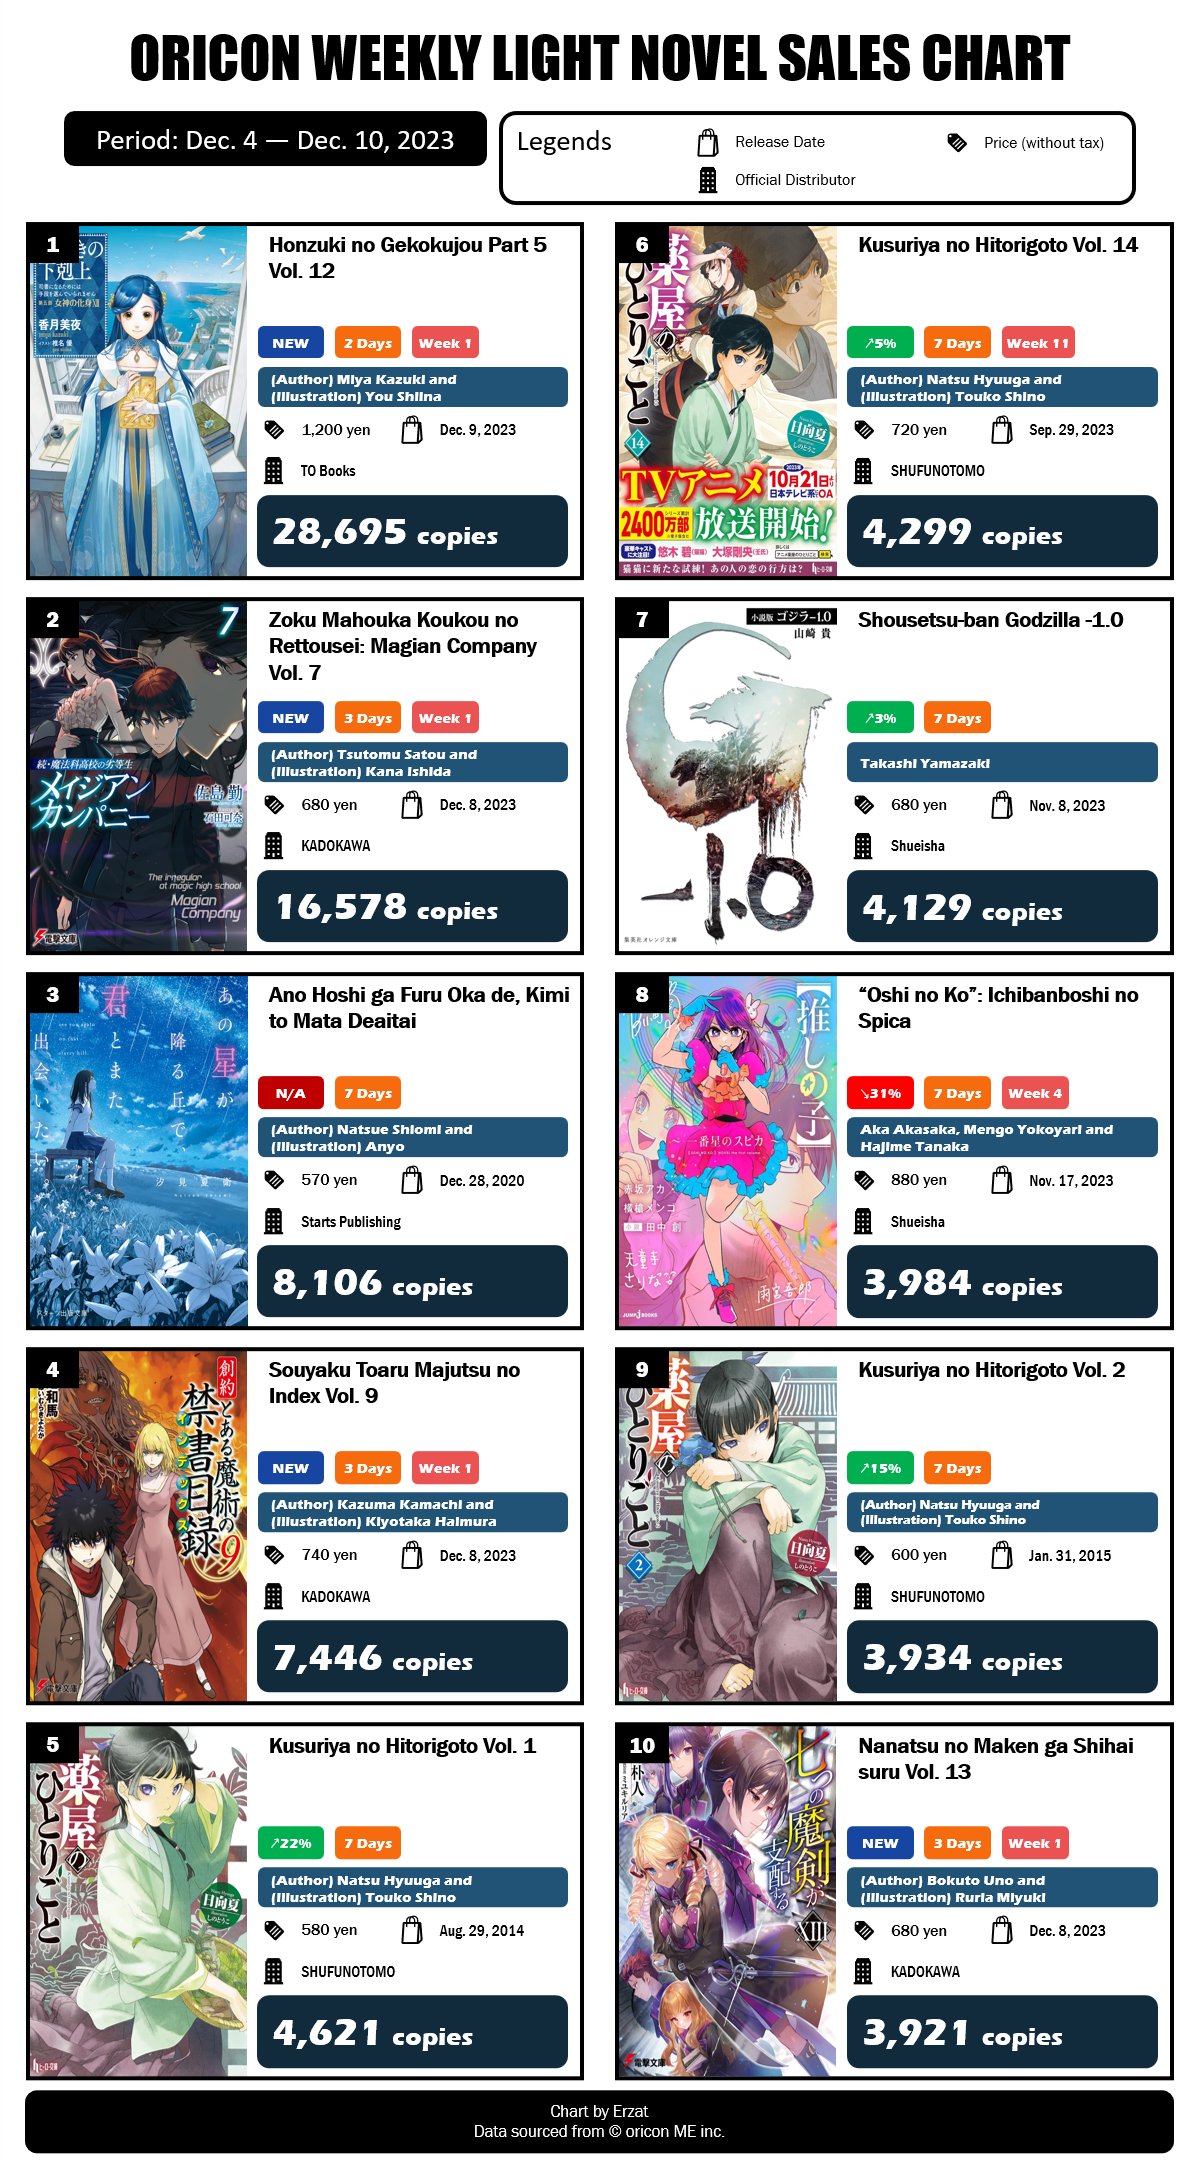 Japan Top 10 Weekly Anime Blu-ray and DVD Sales Ranking: December